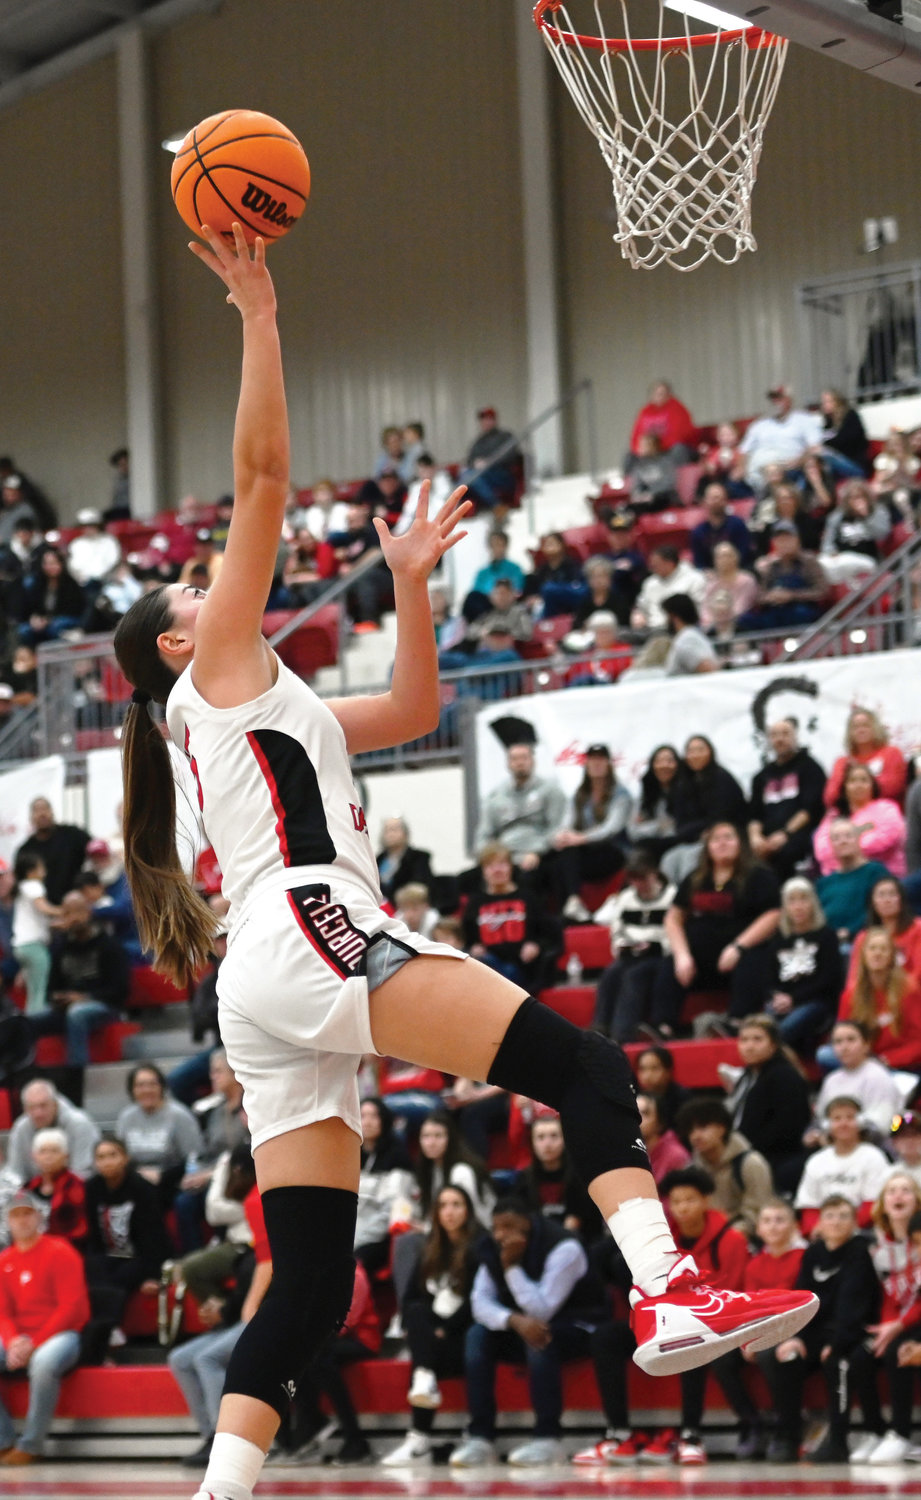 Purcell sophomore Ella Resendiz skies for a layup during the Dragons’ 43-31 win over Davis Friday night. Resendiz scored six points.